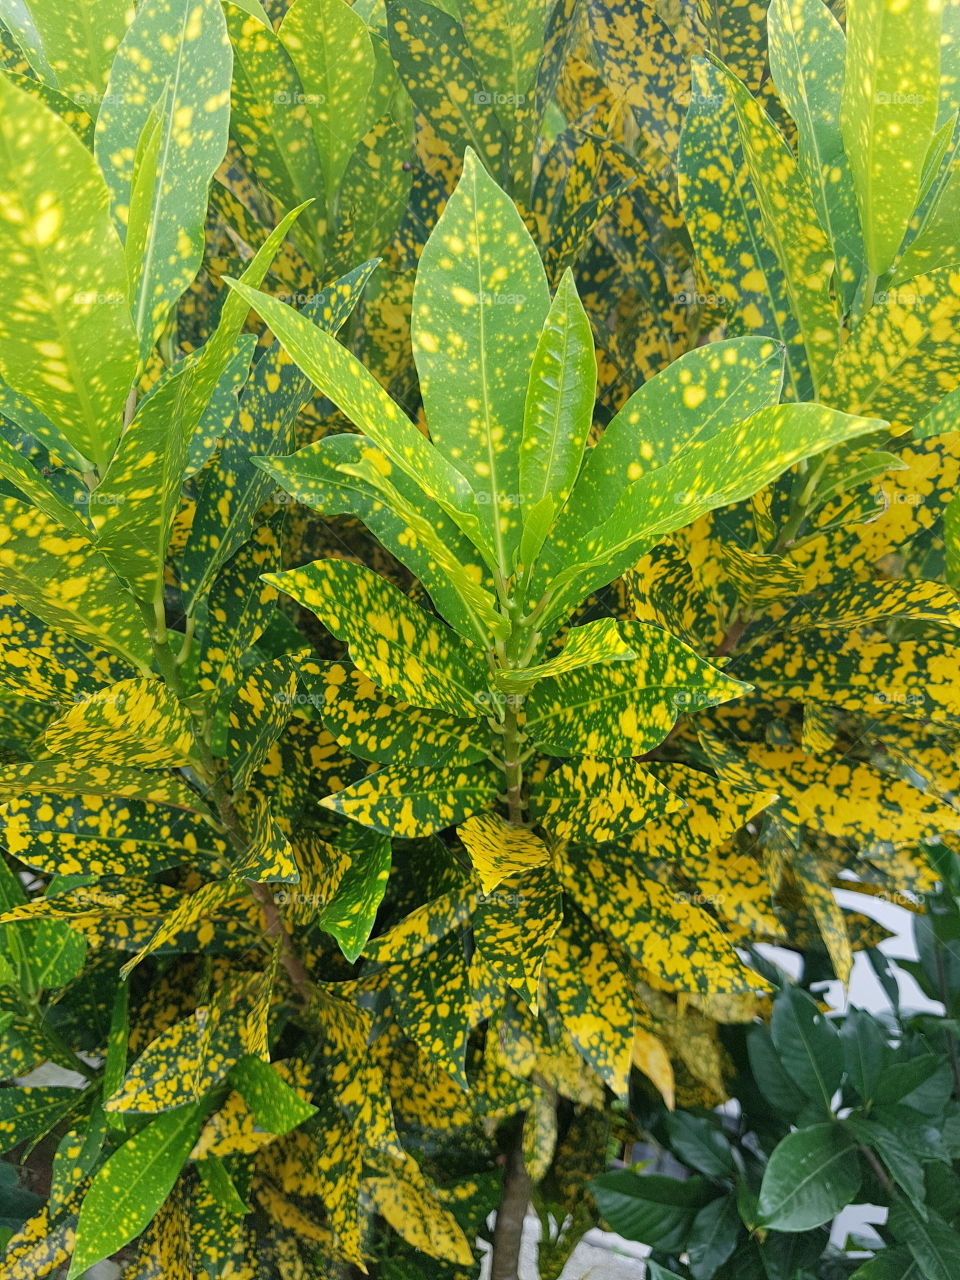 attractive leaves - leaves that are beautiful by itself.